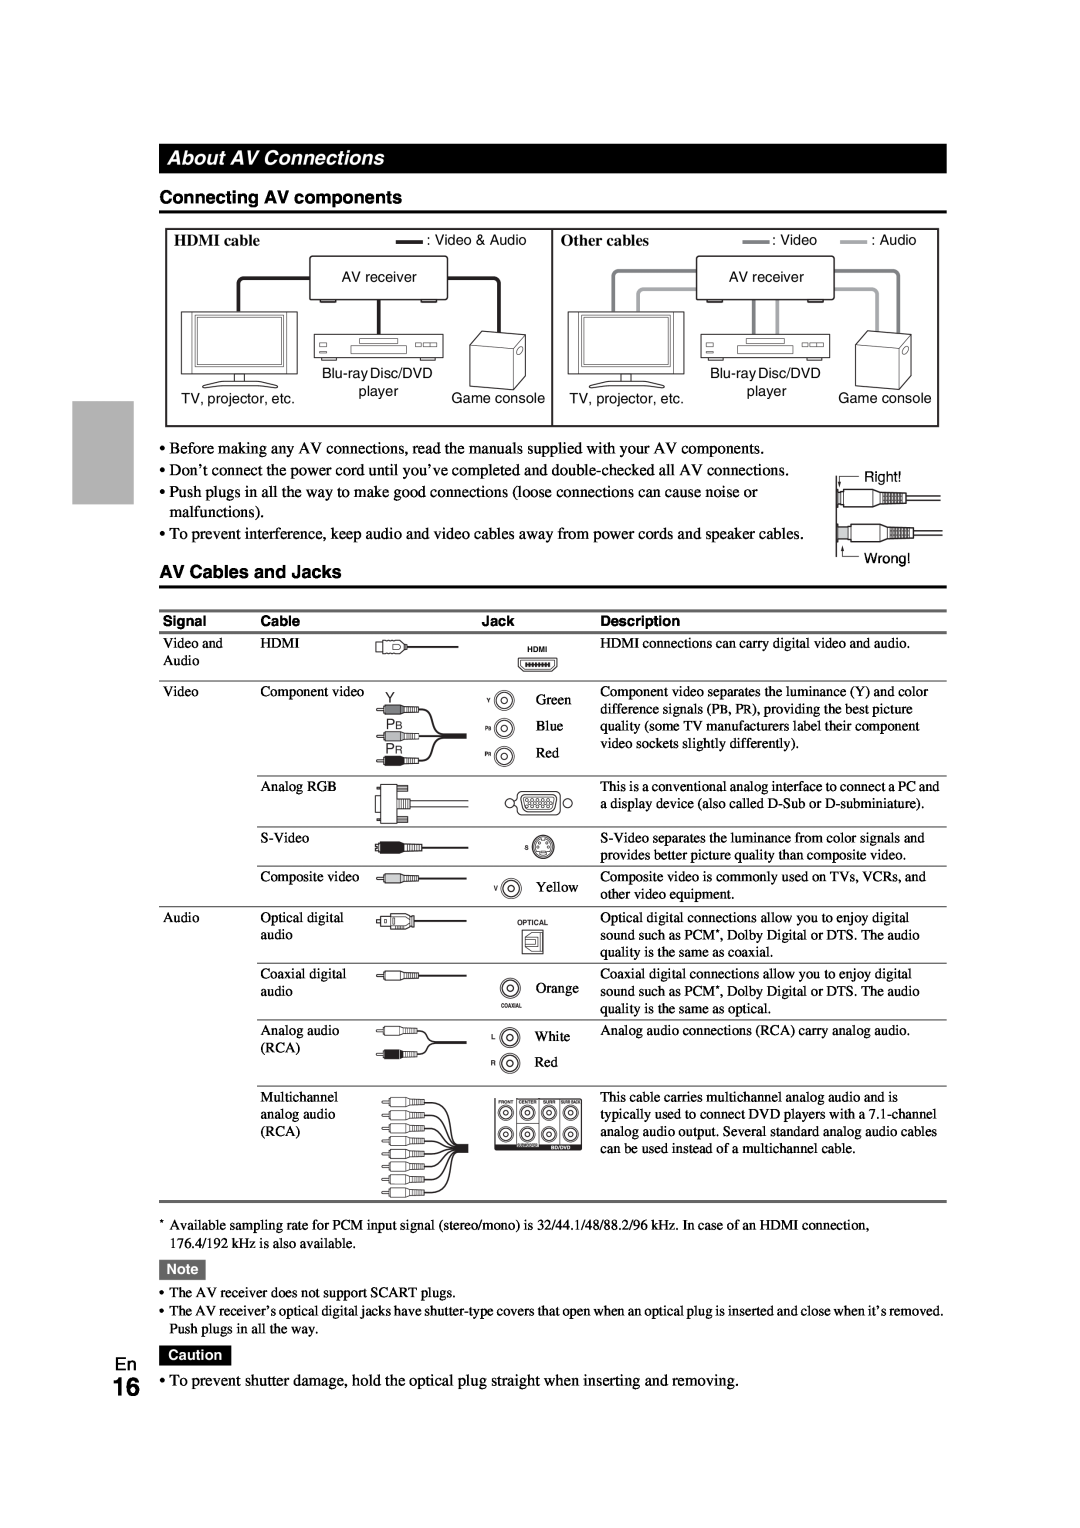 Onkyo TX-NR709 instruction manual About AV Connections, Connecting AV components, AV Cables and Jacks 